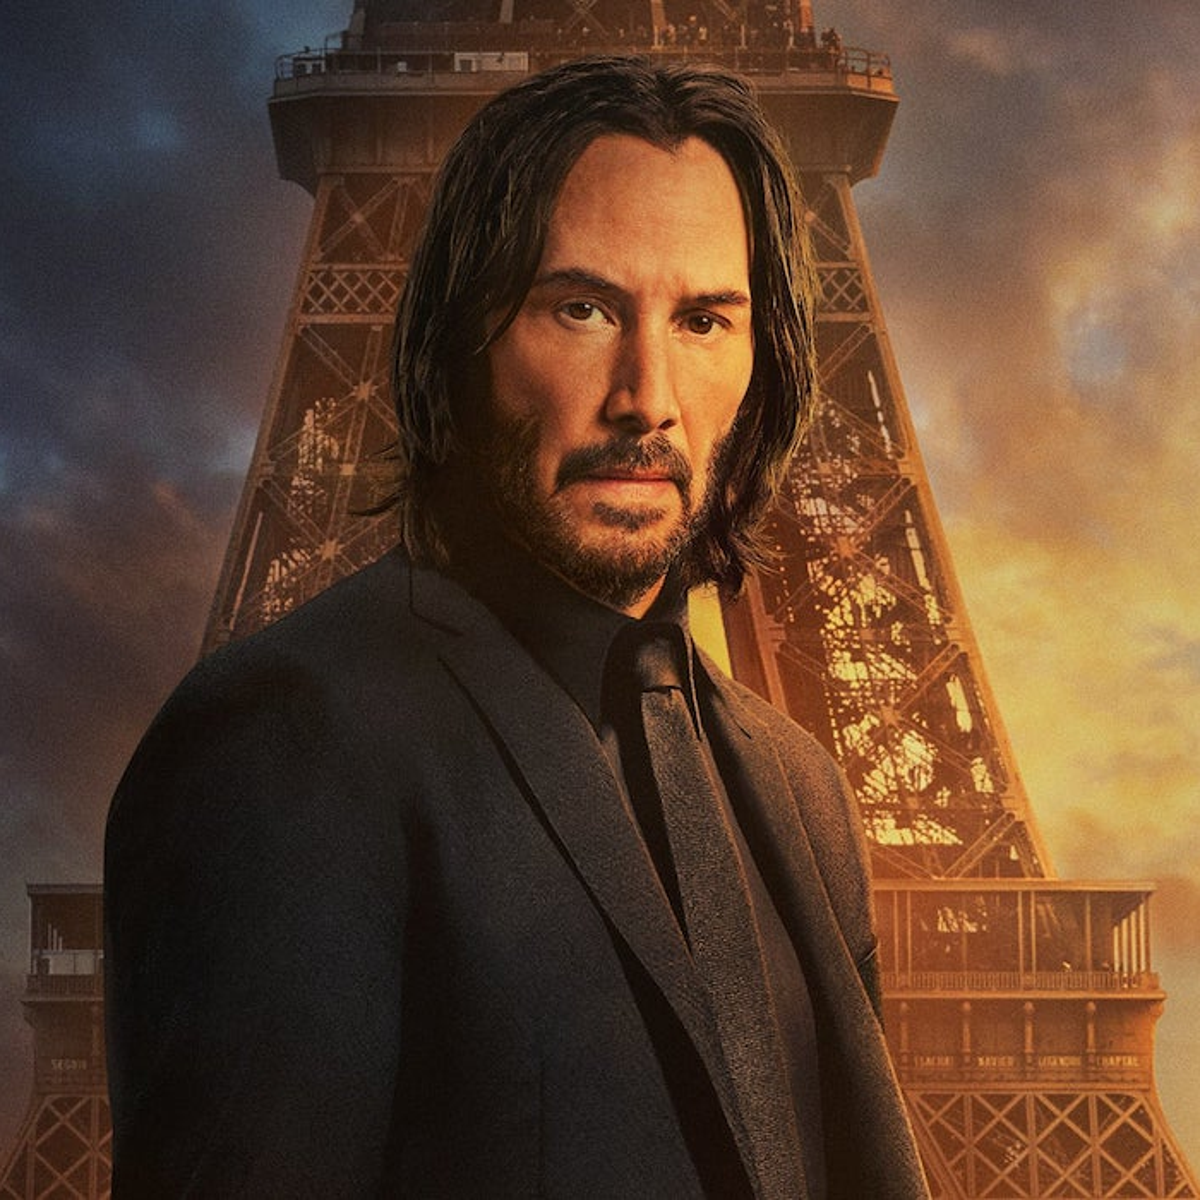 John Wick 4 Gets Imminent New Streaming Release Date (Official)